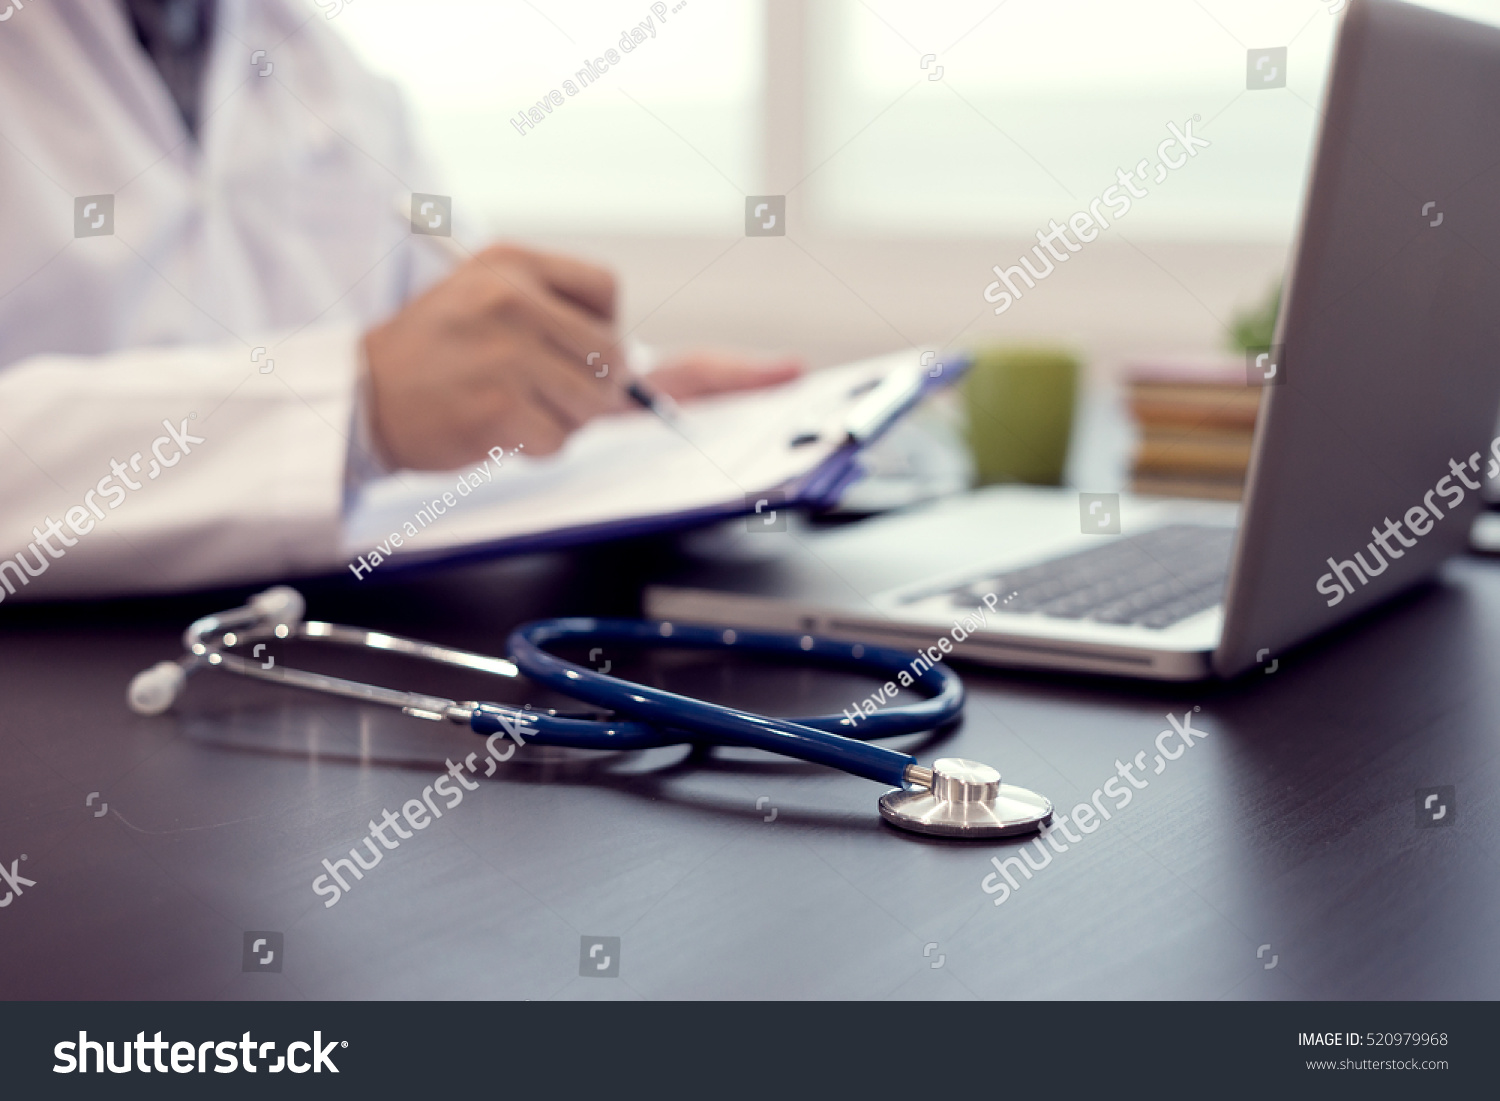 Stethoscope with clipboard and Laptop on desk,Doctor working in hospital writing a prescription, Healthcare and medical concept,test results in background,vintage color,selective focus #520979968